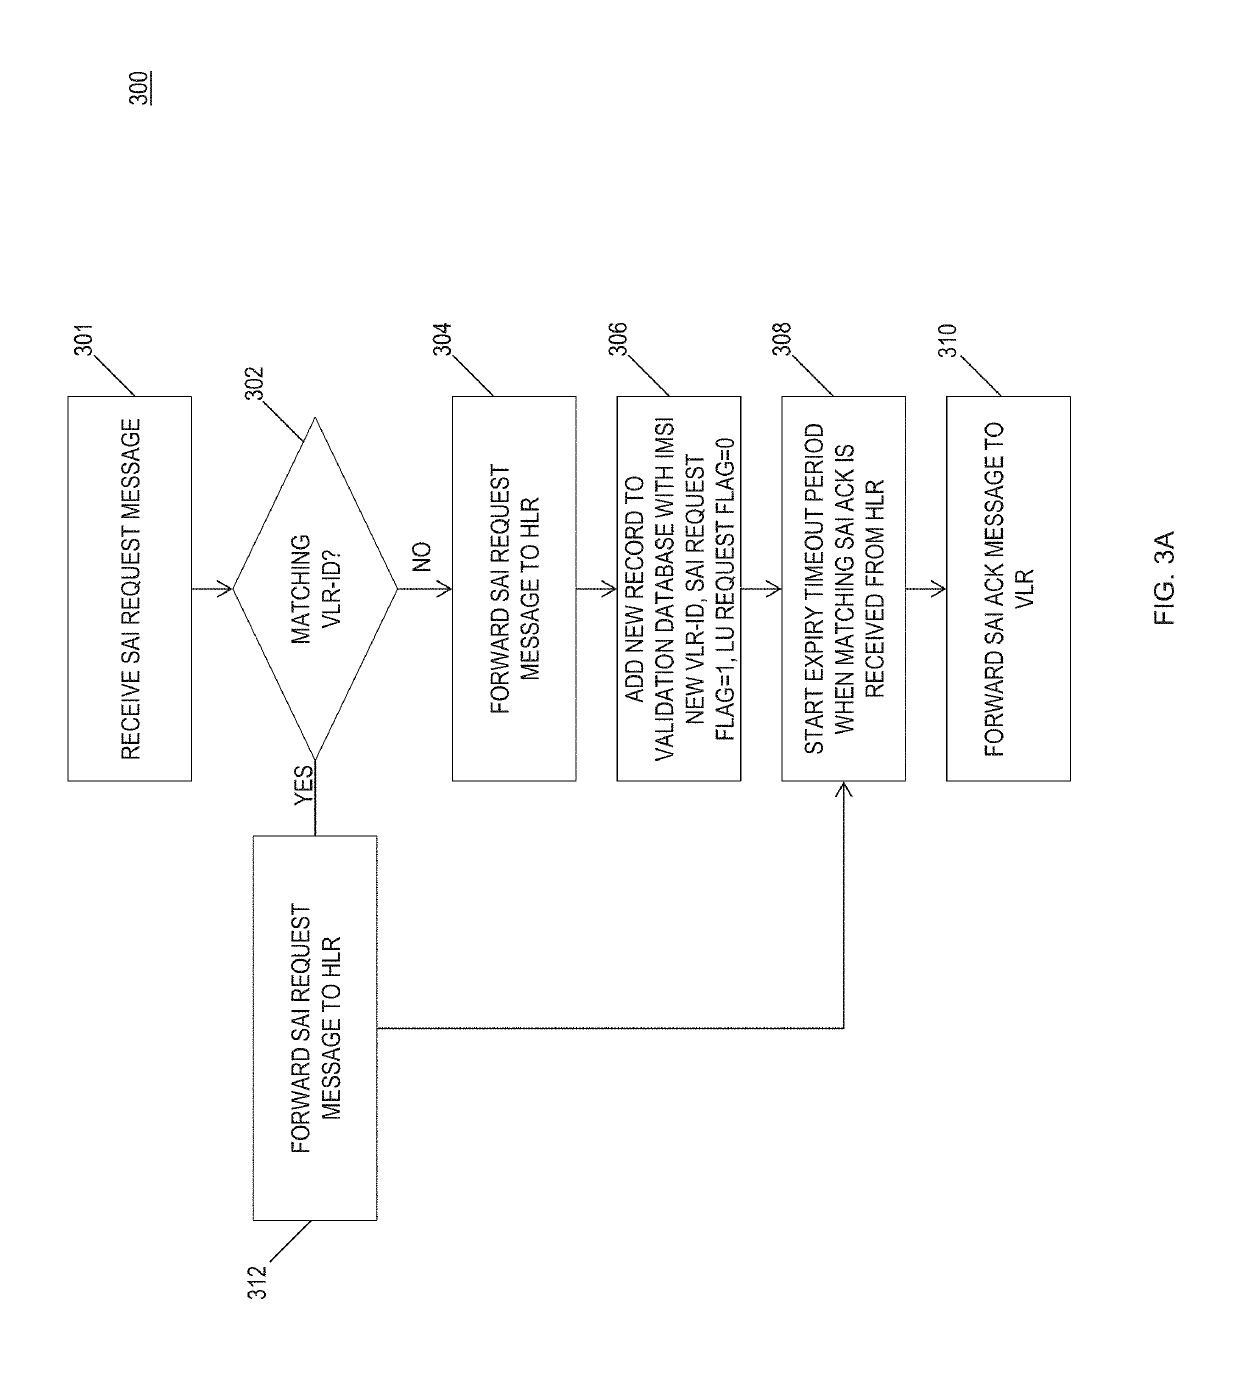 Methods, systems, and computer readable media for validating a visitor location register (VLR) using a signaling system No. 7 (SS7) signal transfer point (STP)